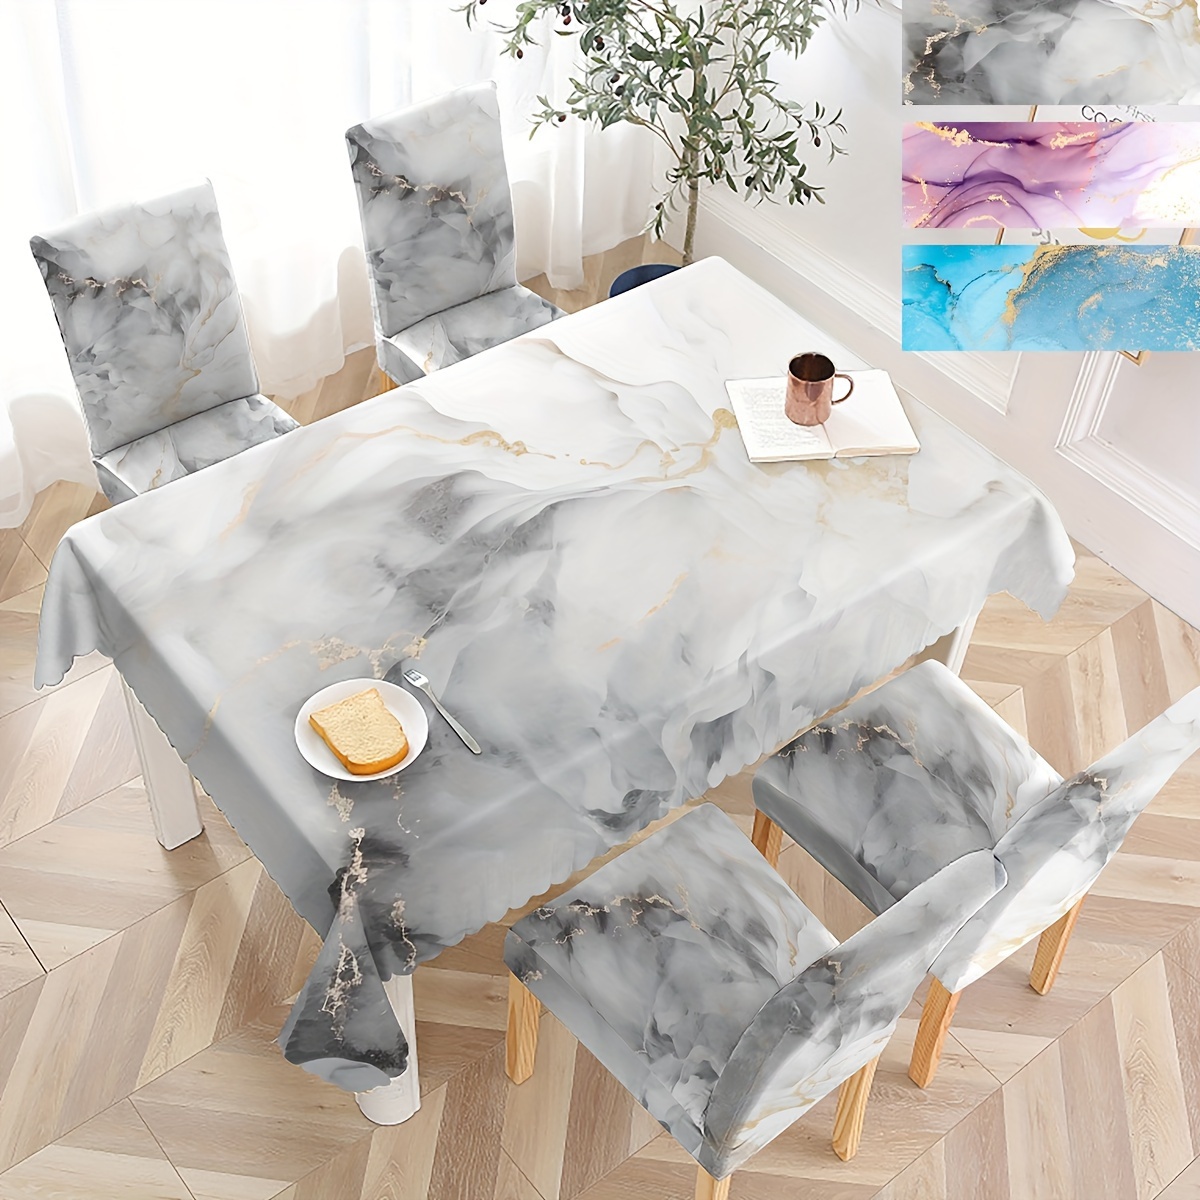 

Easy-care 4pc Marble Print Chair Covers & Tablecloth Set - Perfect For Dining, Parties & Gifts